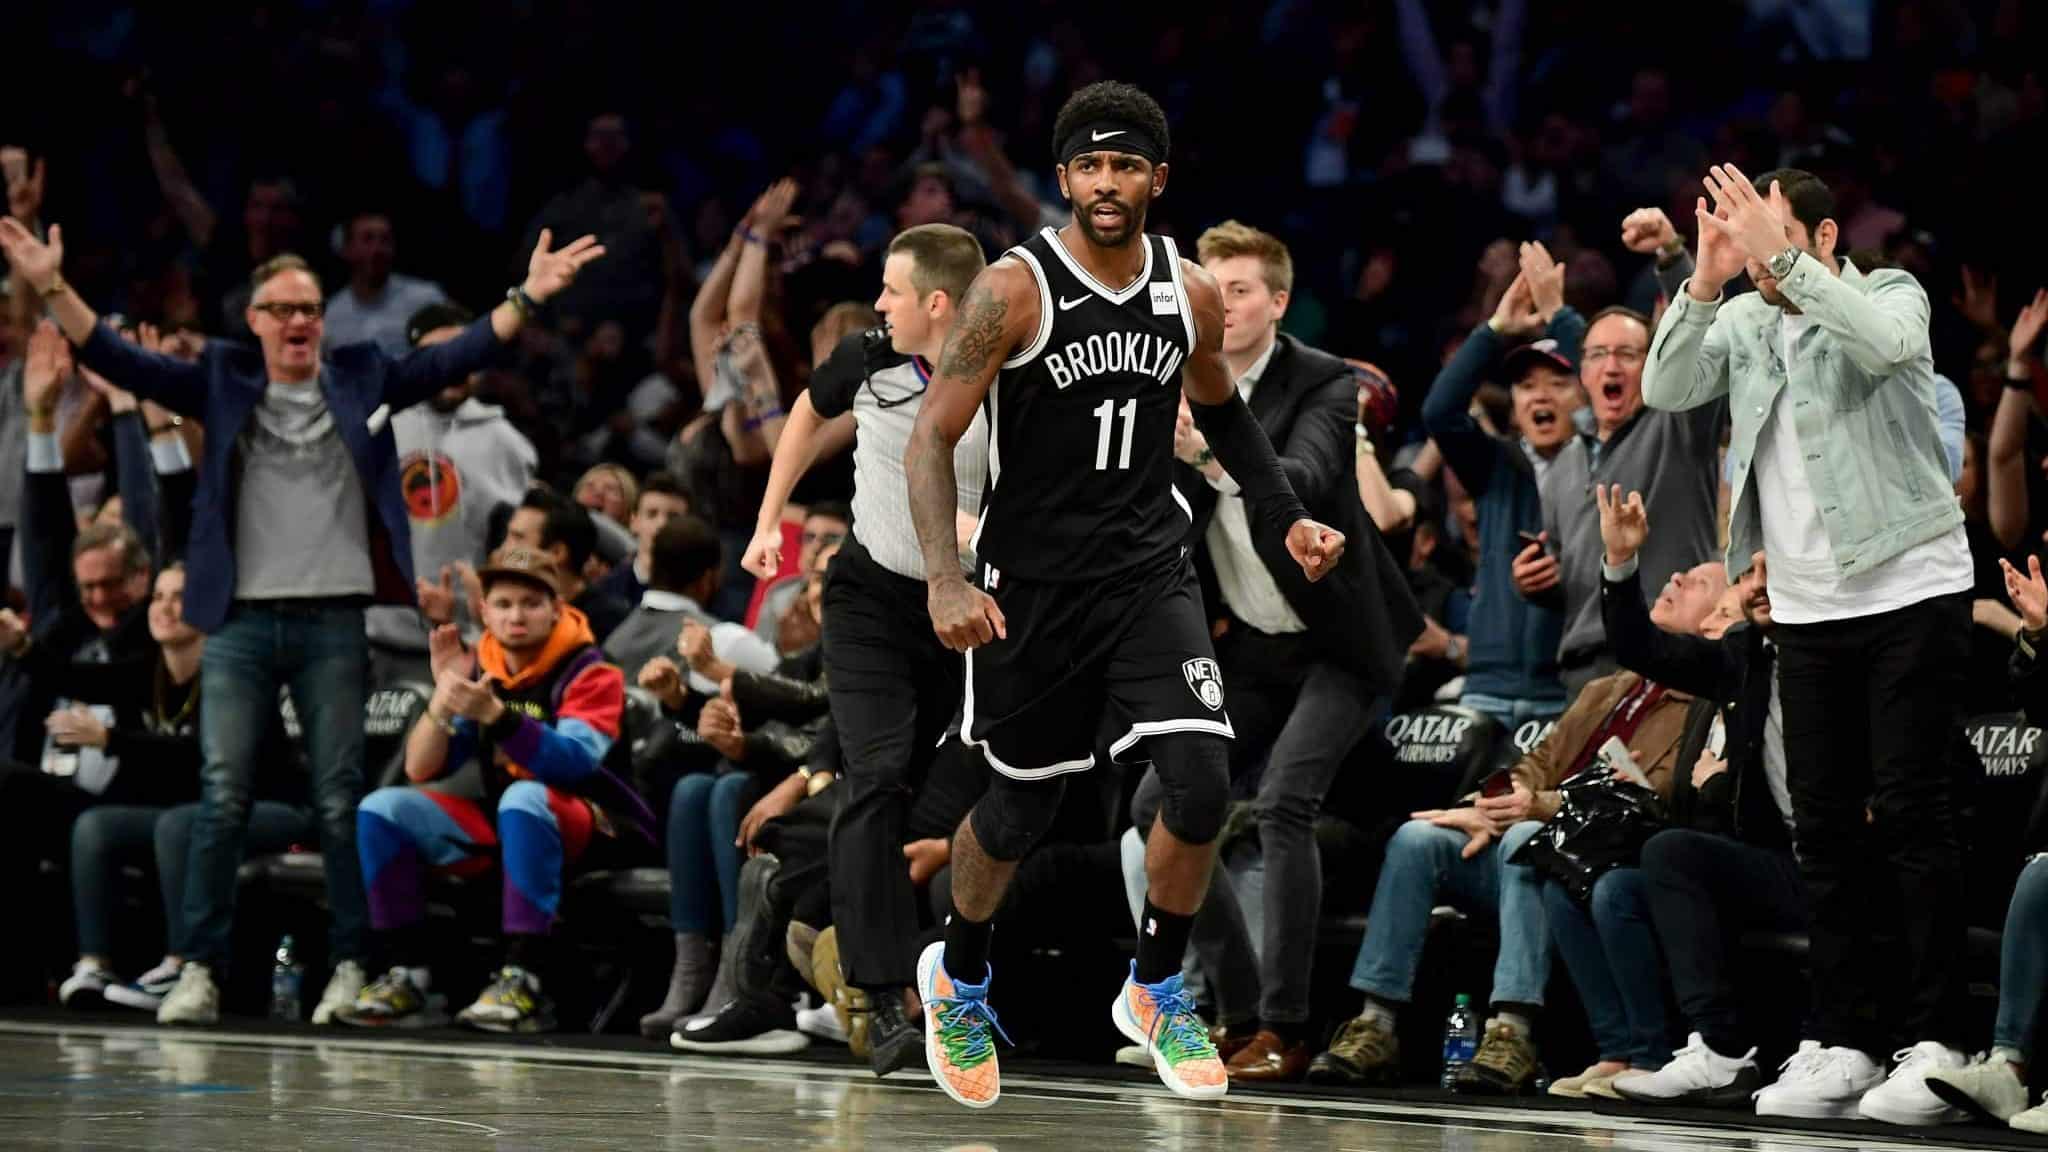 NEW YORK, NEW YORK - OCTOBER 23: Kyrie Irving #11 of the Brooklyn Nets reacts during the second half of their game against the Minnesota Timberwolves at Barclays Center on October 23, 2019 in the Brooklyn borough of New York City. NOTE TO USER: User expressly acknowledges and agrees that, by downloading and or using this photograph, User is consenting to the terms and conditions of the Getty Images License Agreement.